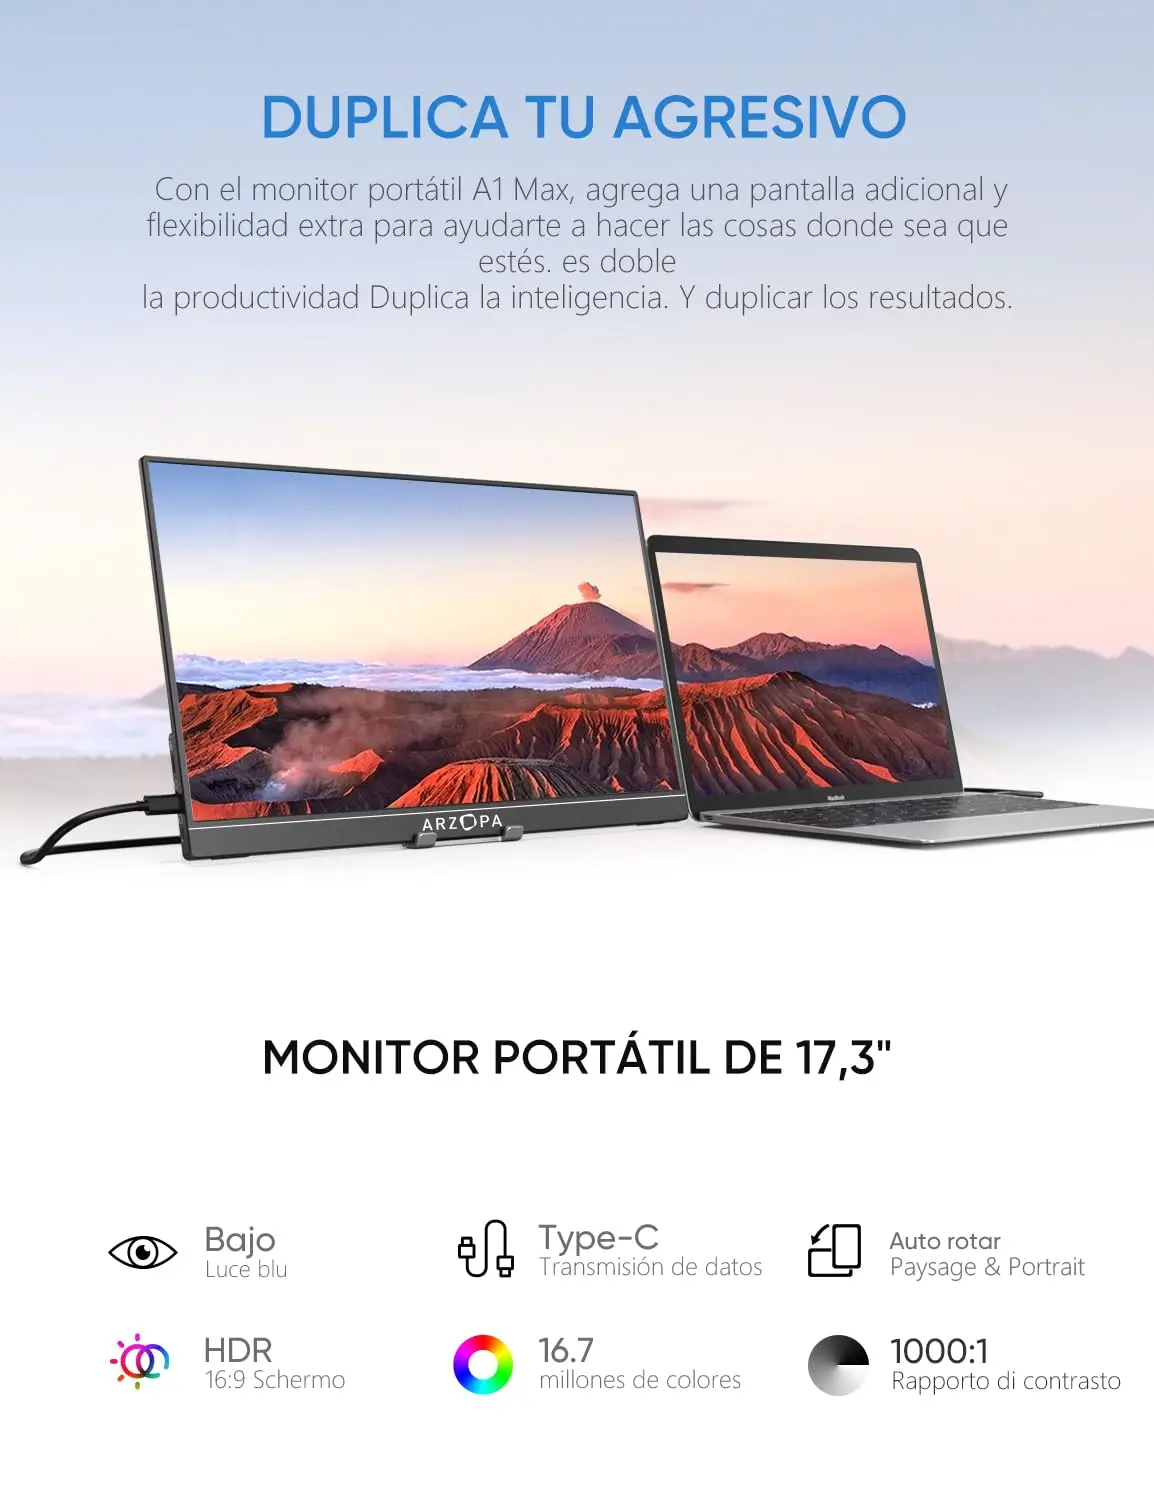 ARZOPA 17.3 FHD Portable Monitor 1080P External Display IPS Screen with  USB C mini-HDMI Port for Laptop Mac PC Xbox PS Switch - AliExpress